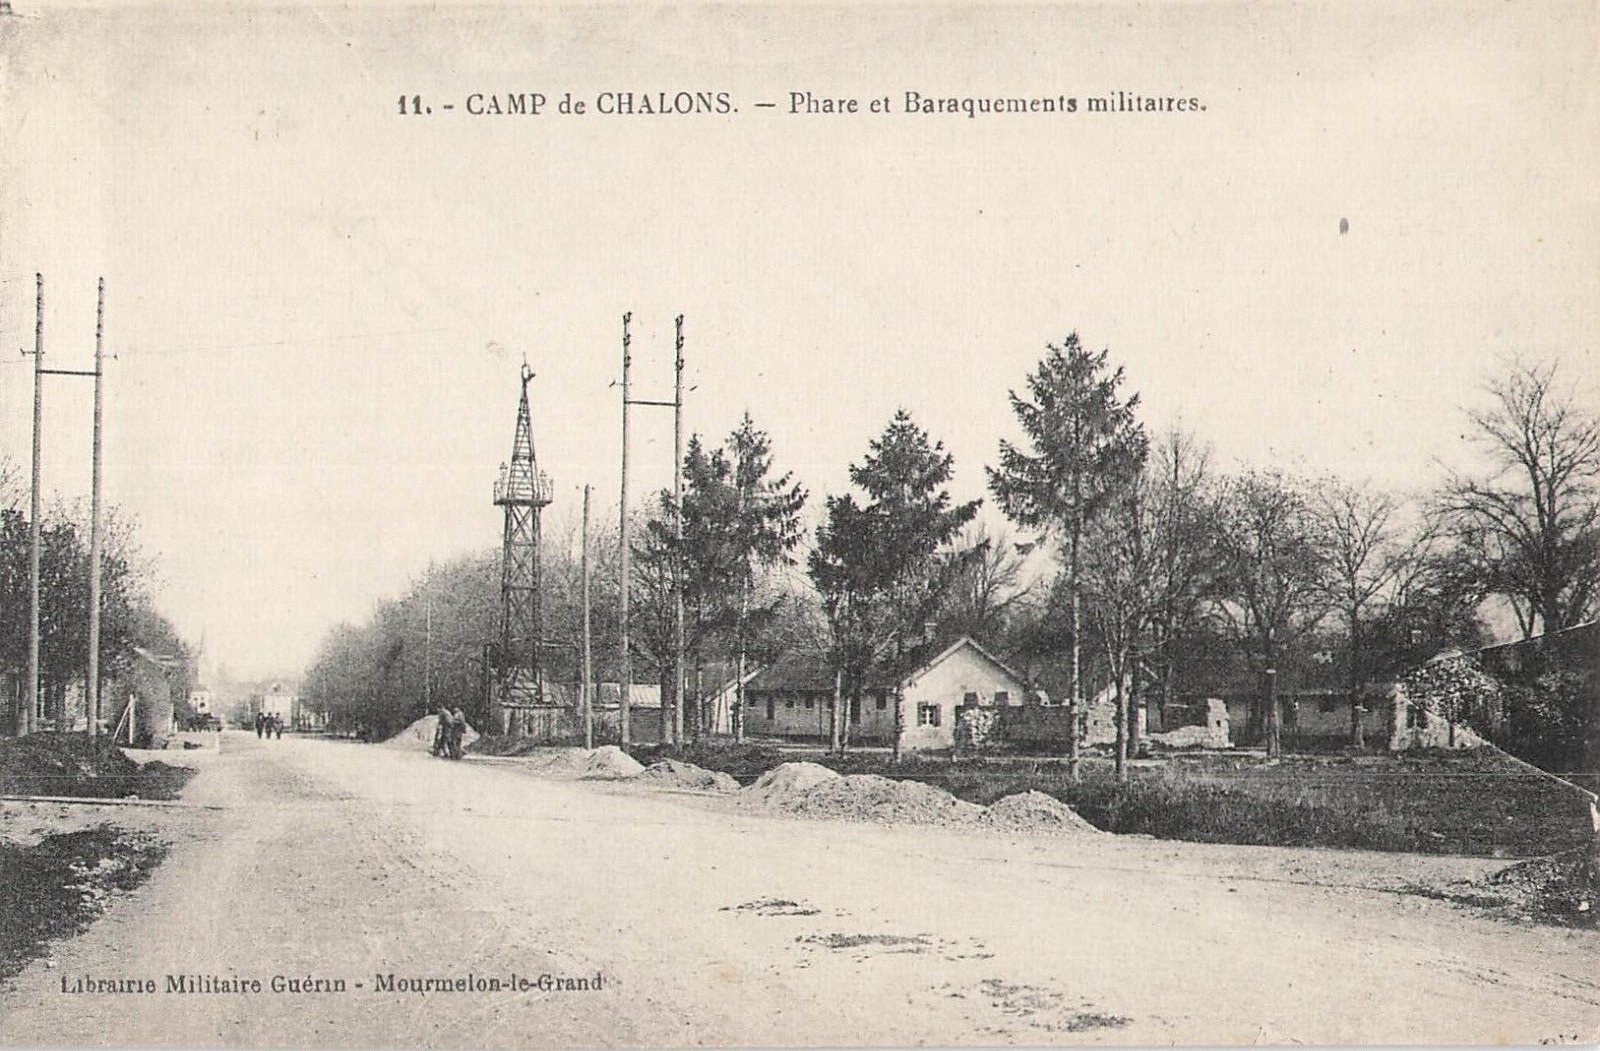 CP FLAGSHIP CHALON CAMP AND MILITARY BARRACKS - 34597